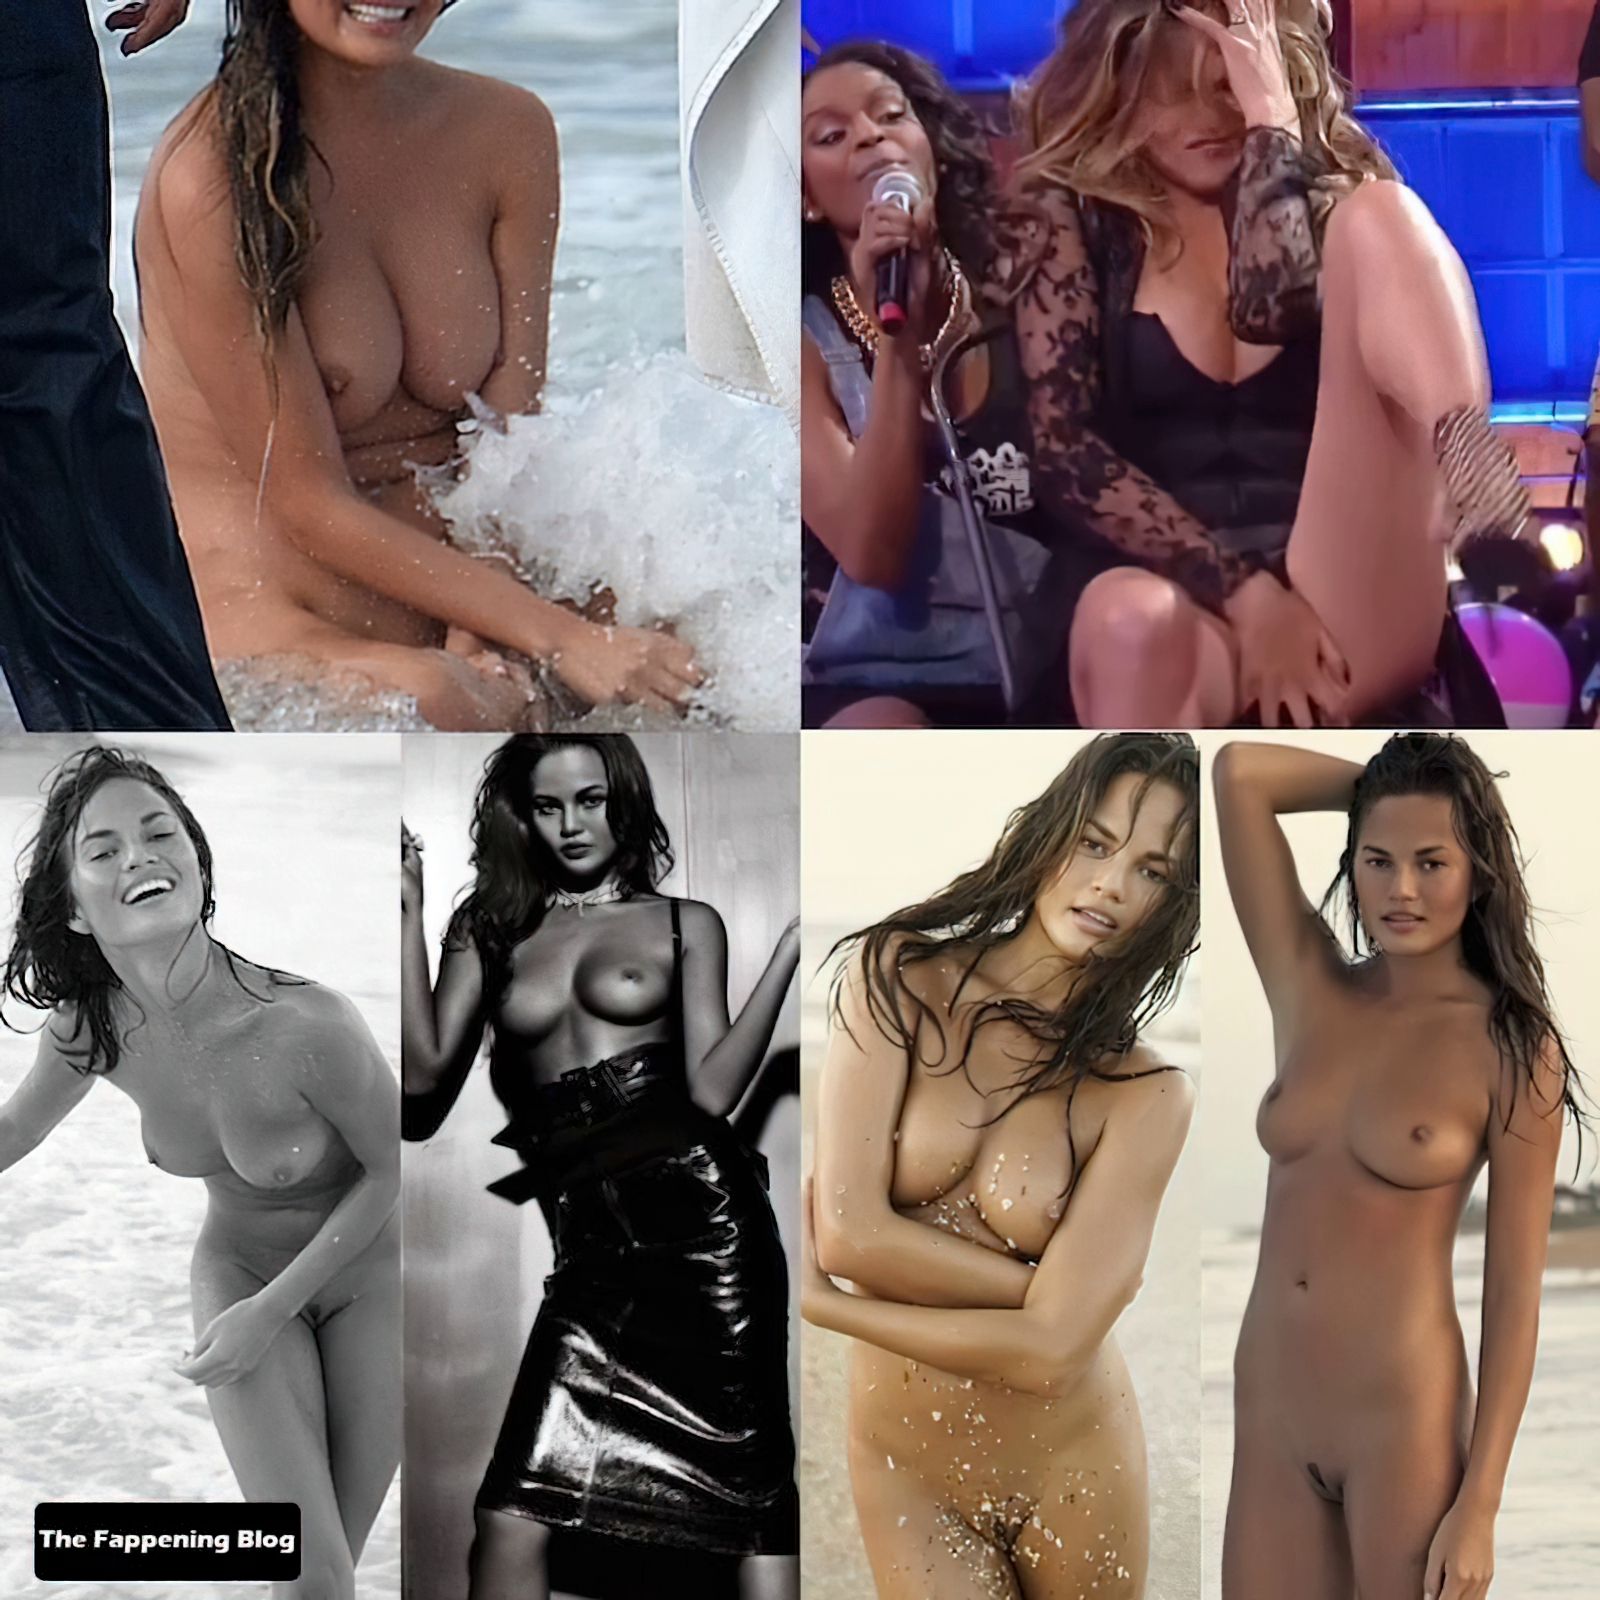 andrew mahlmann recommends mariana cordoba cum compilation pic